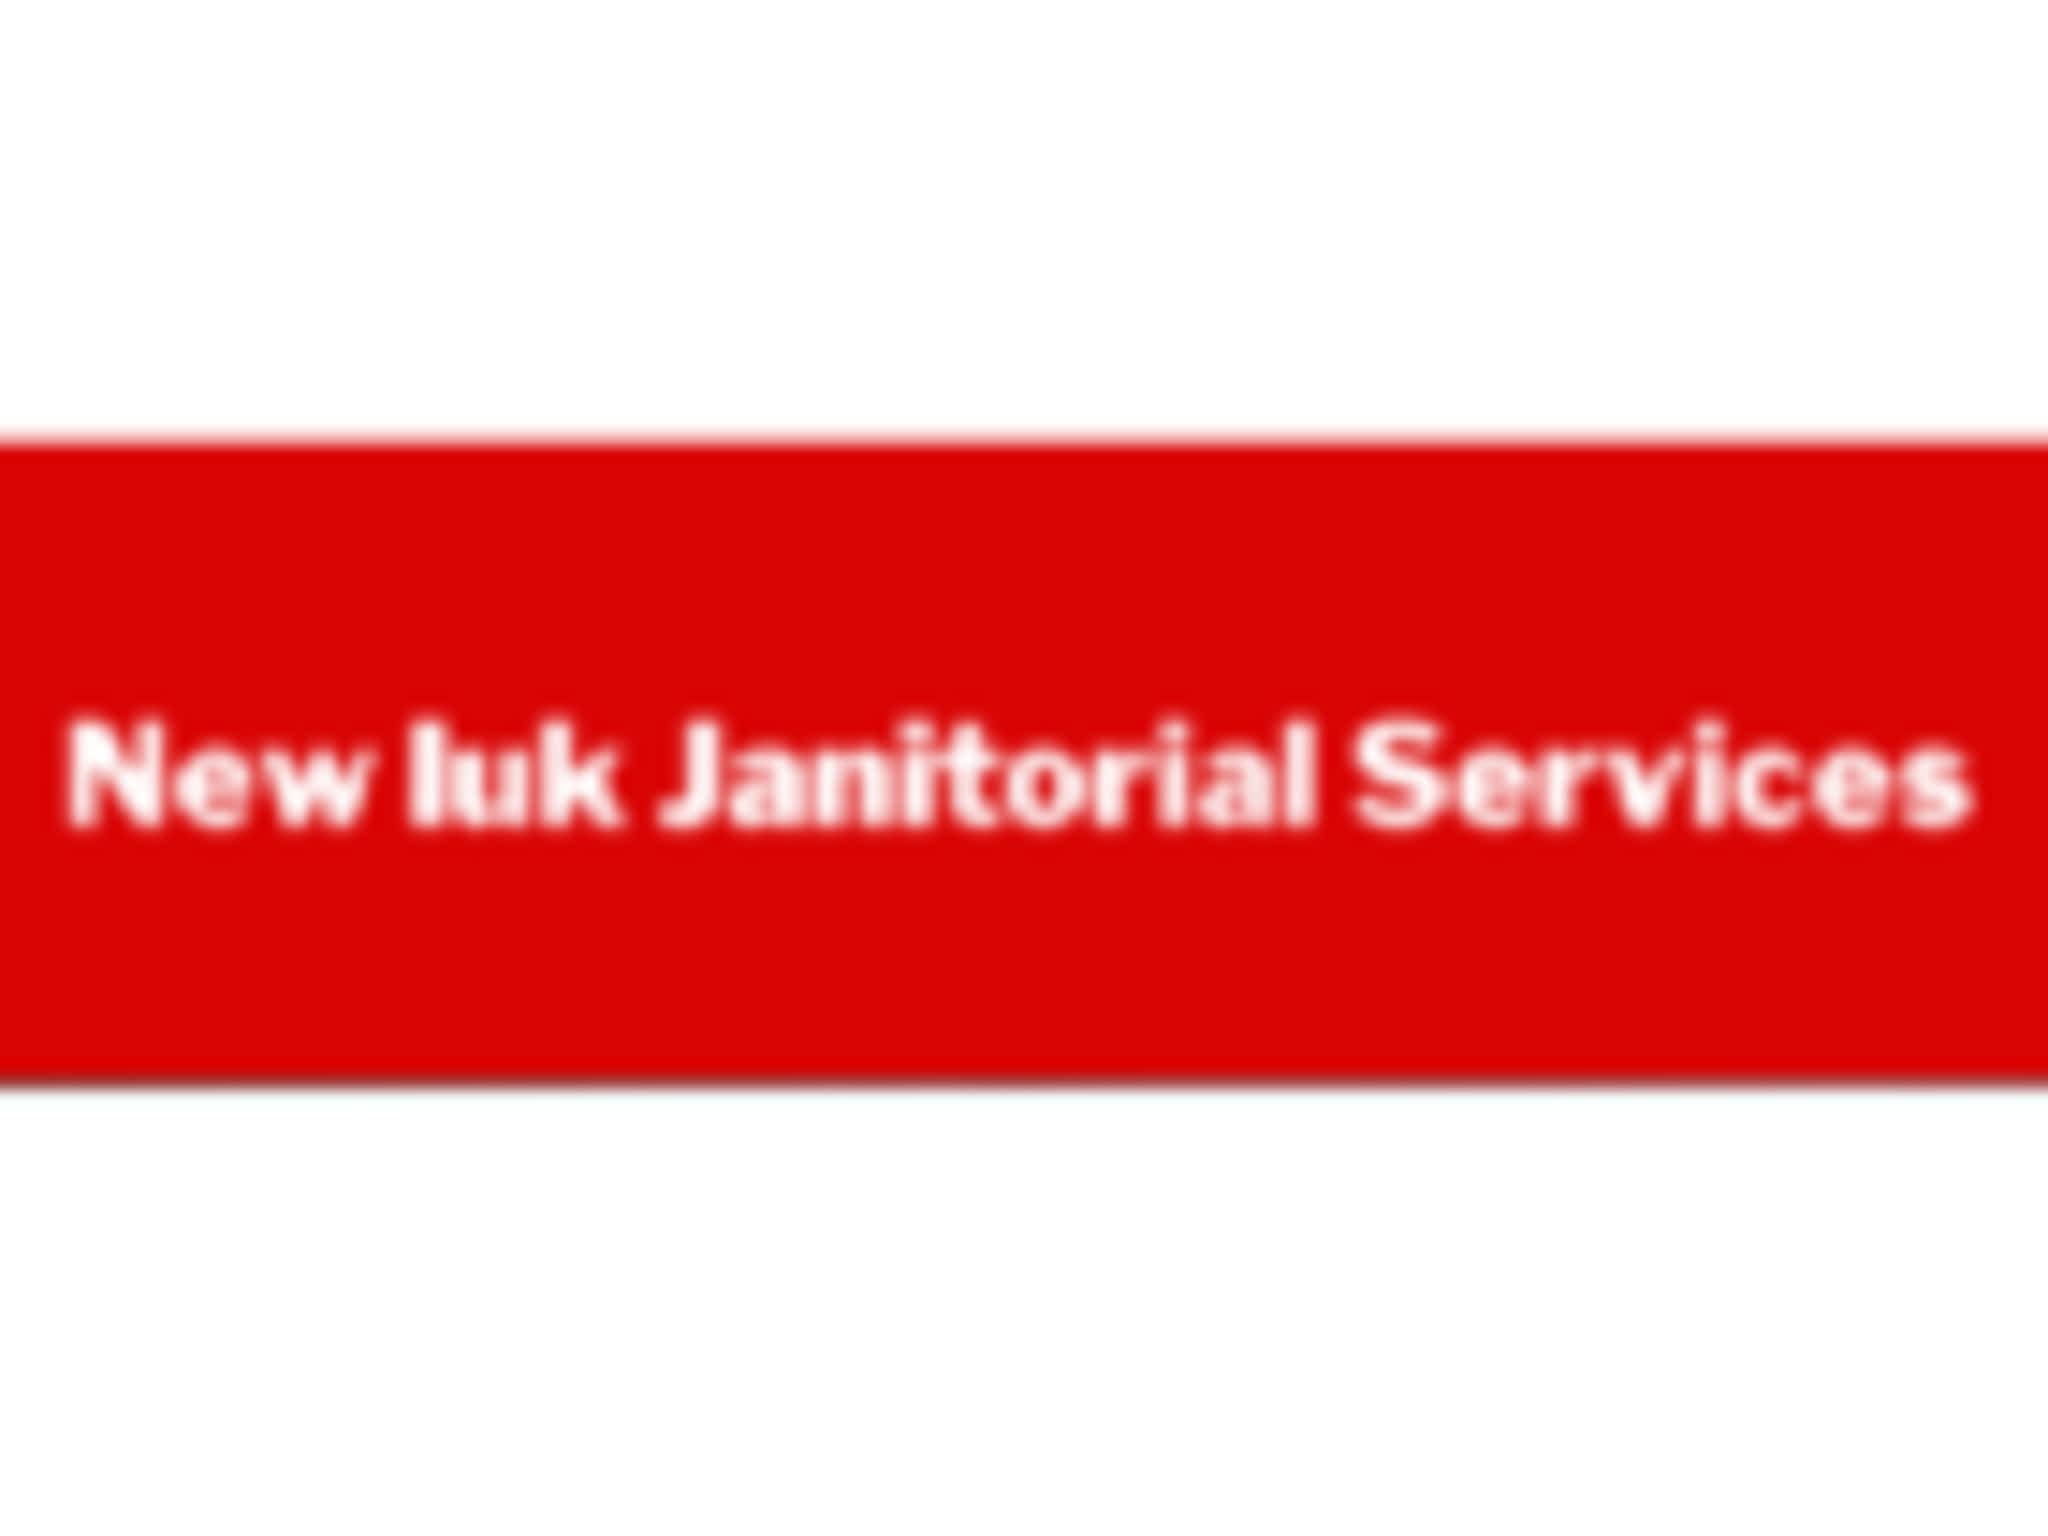 photo New luk Janitorial Services